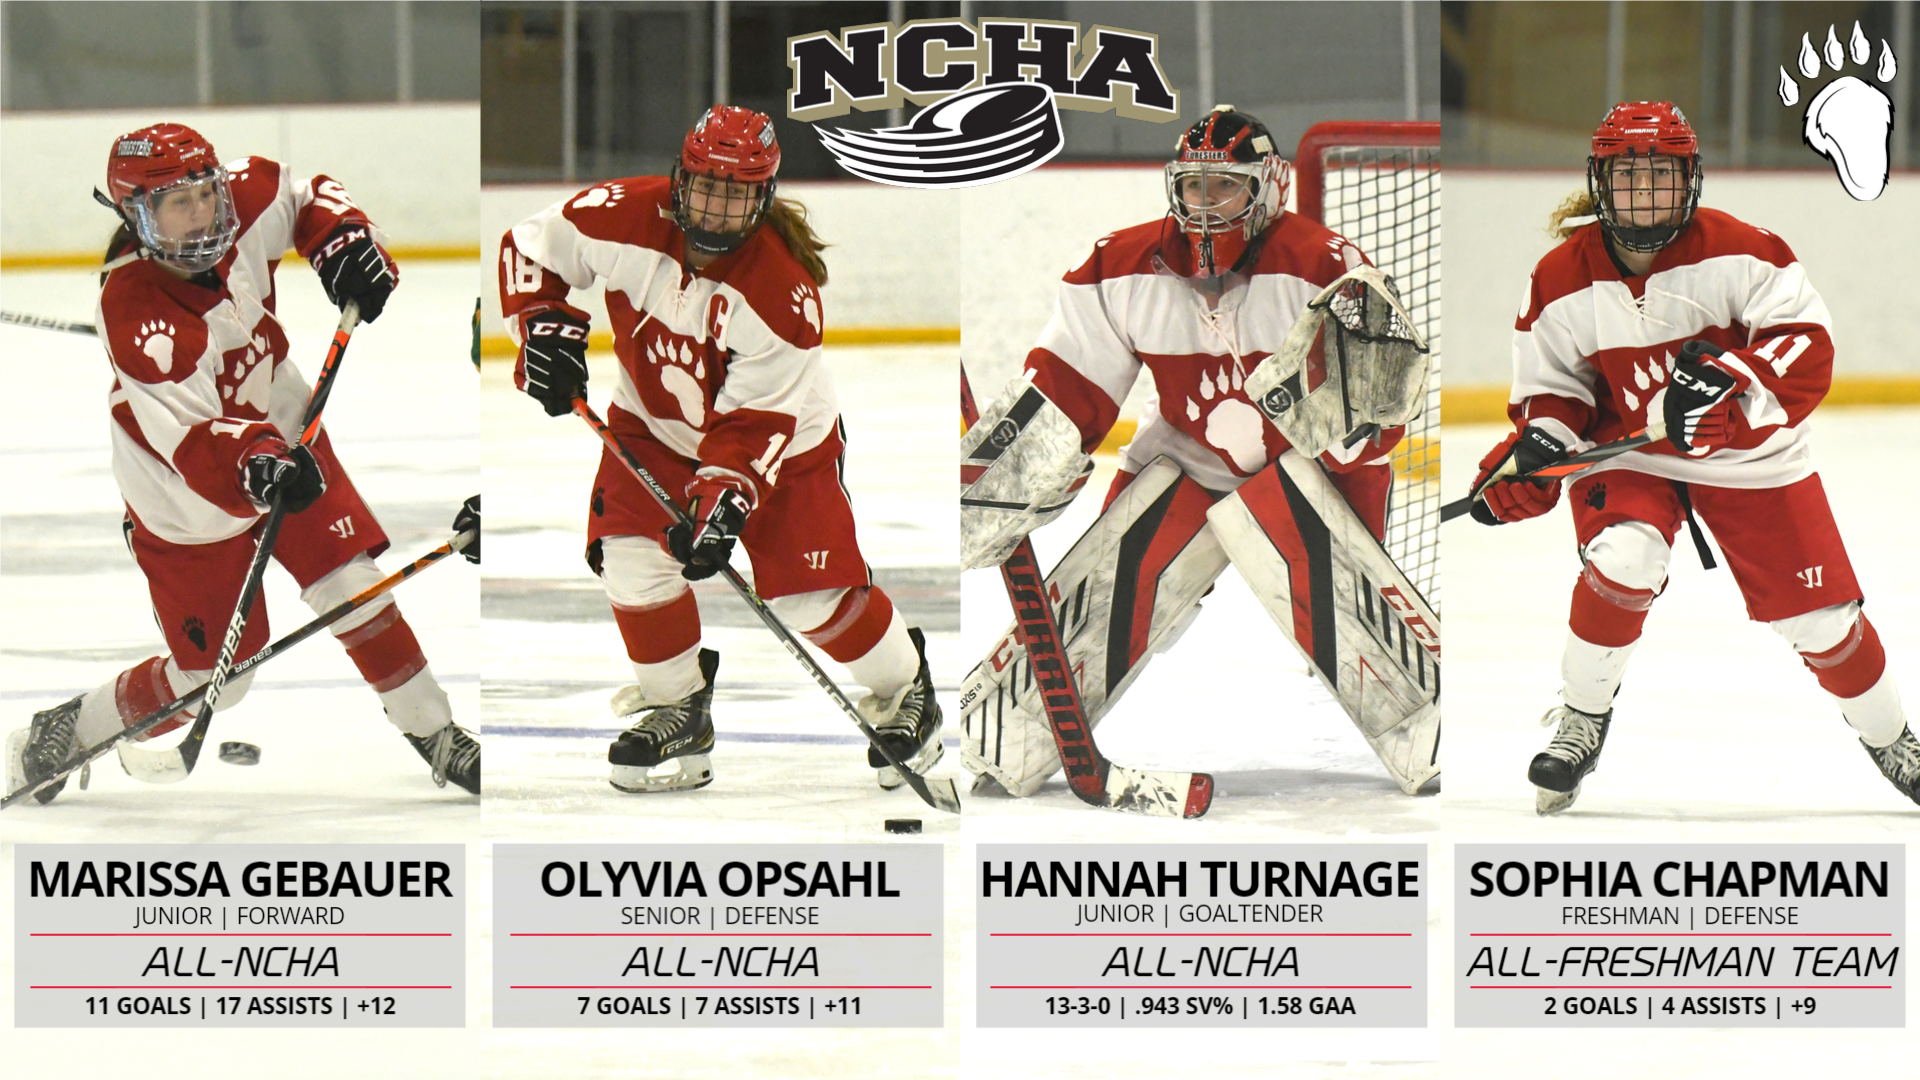 Foresters Well-Represented on NCHA End-of-Season Awards List